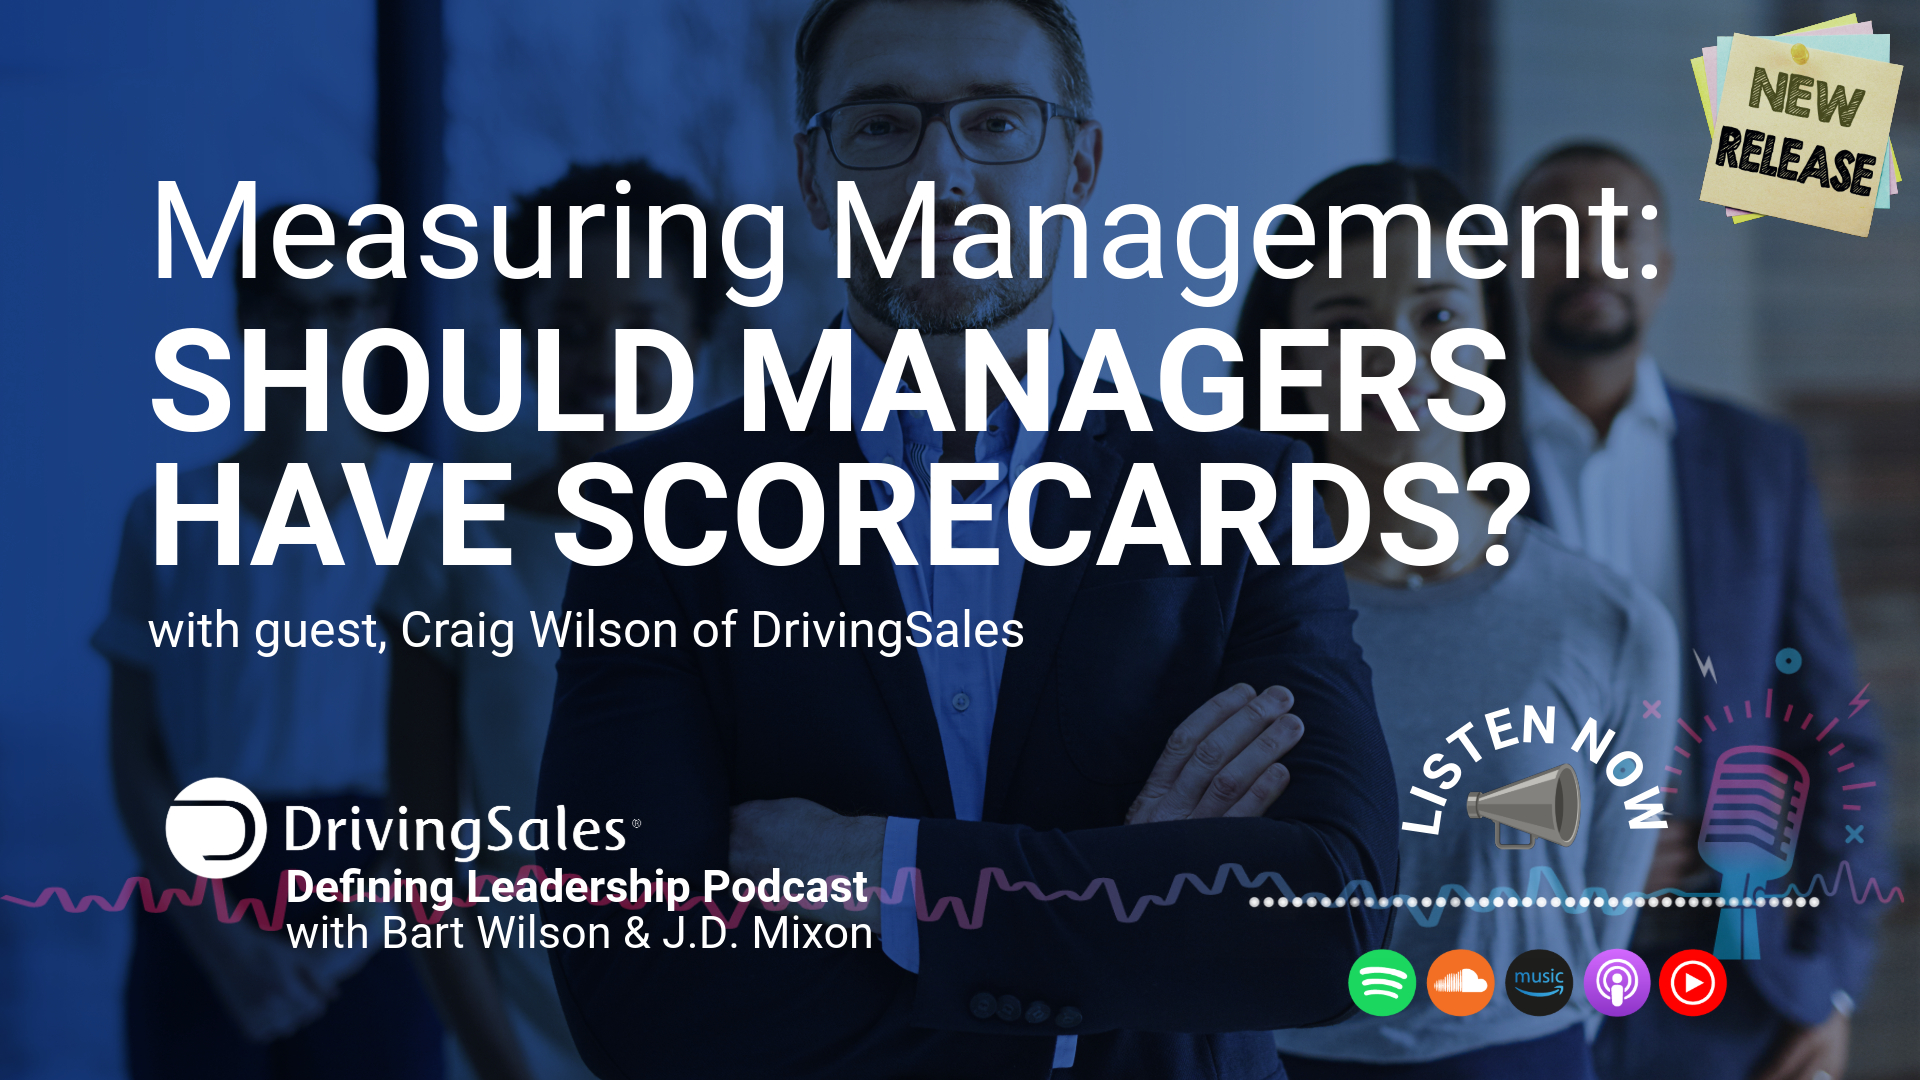 Evaluating Managers in Dealerships with Scorecards is a proven tactic to improve productivity and drive results. 